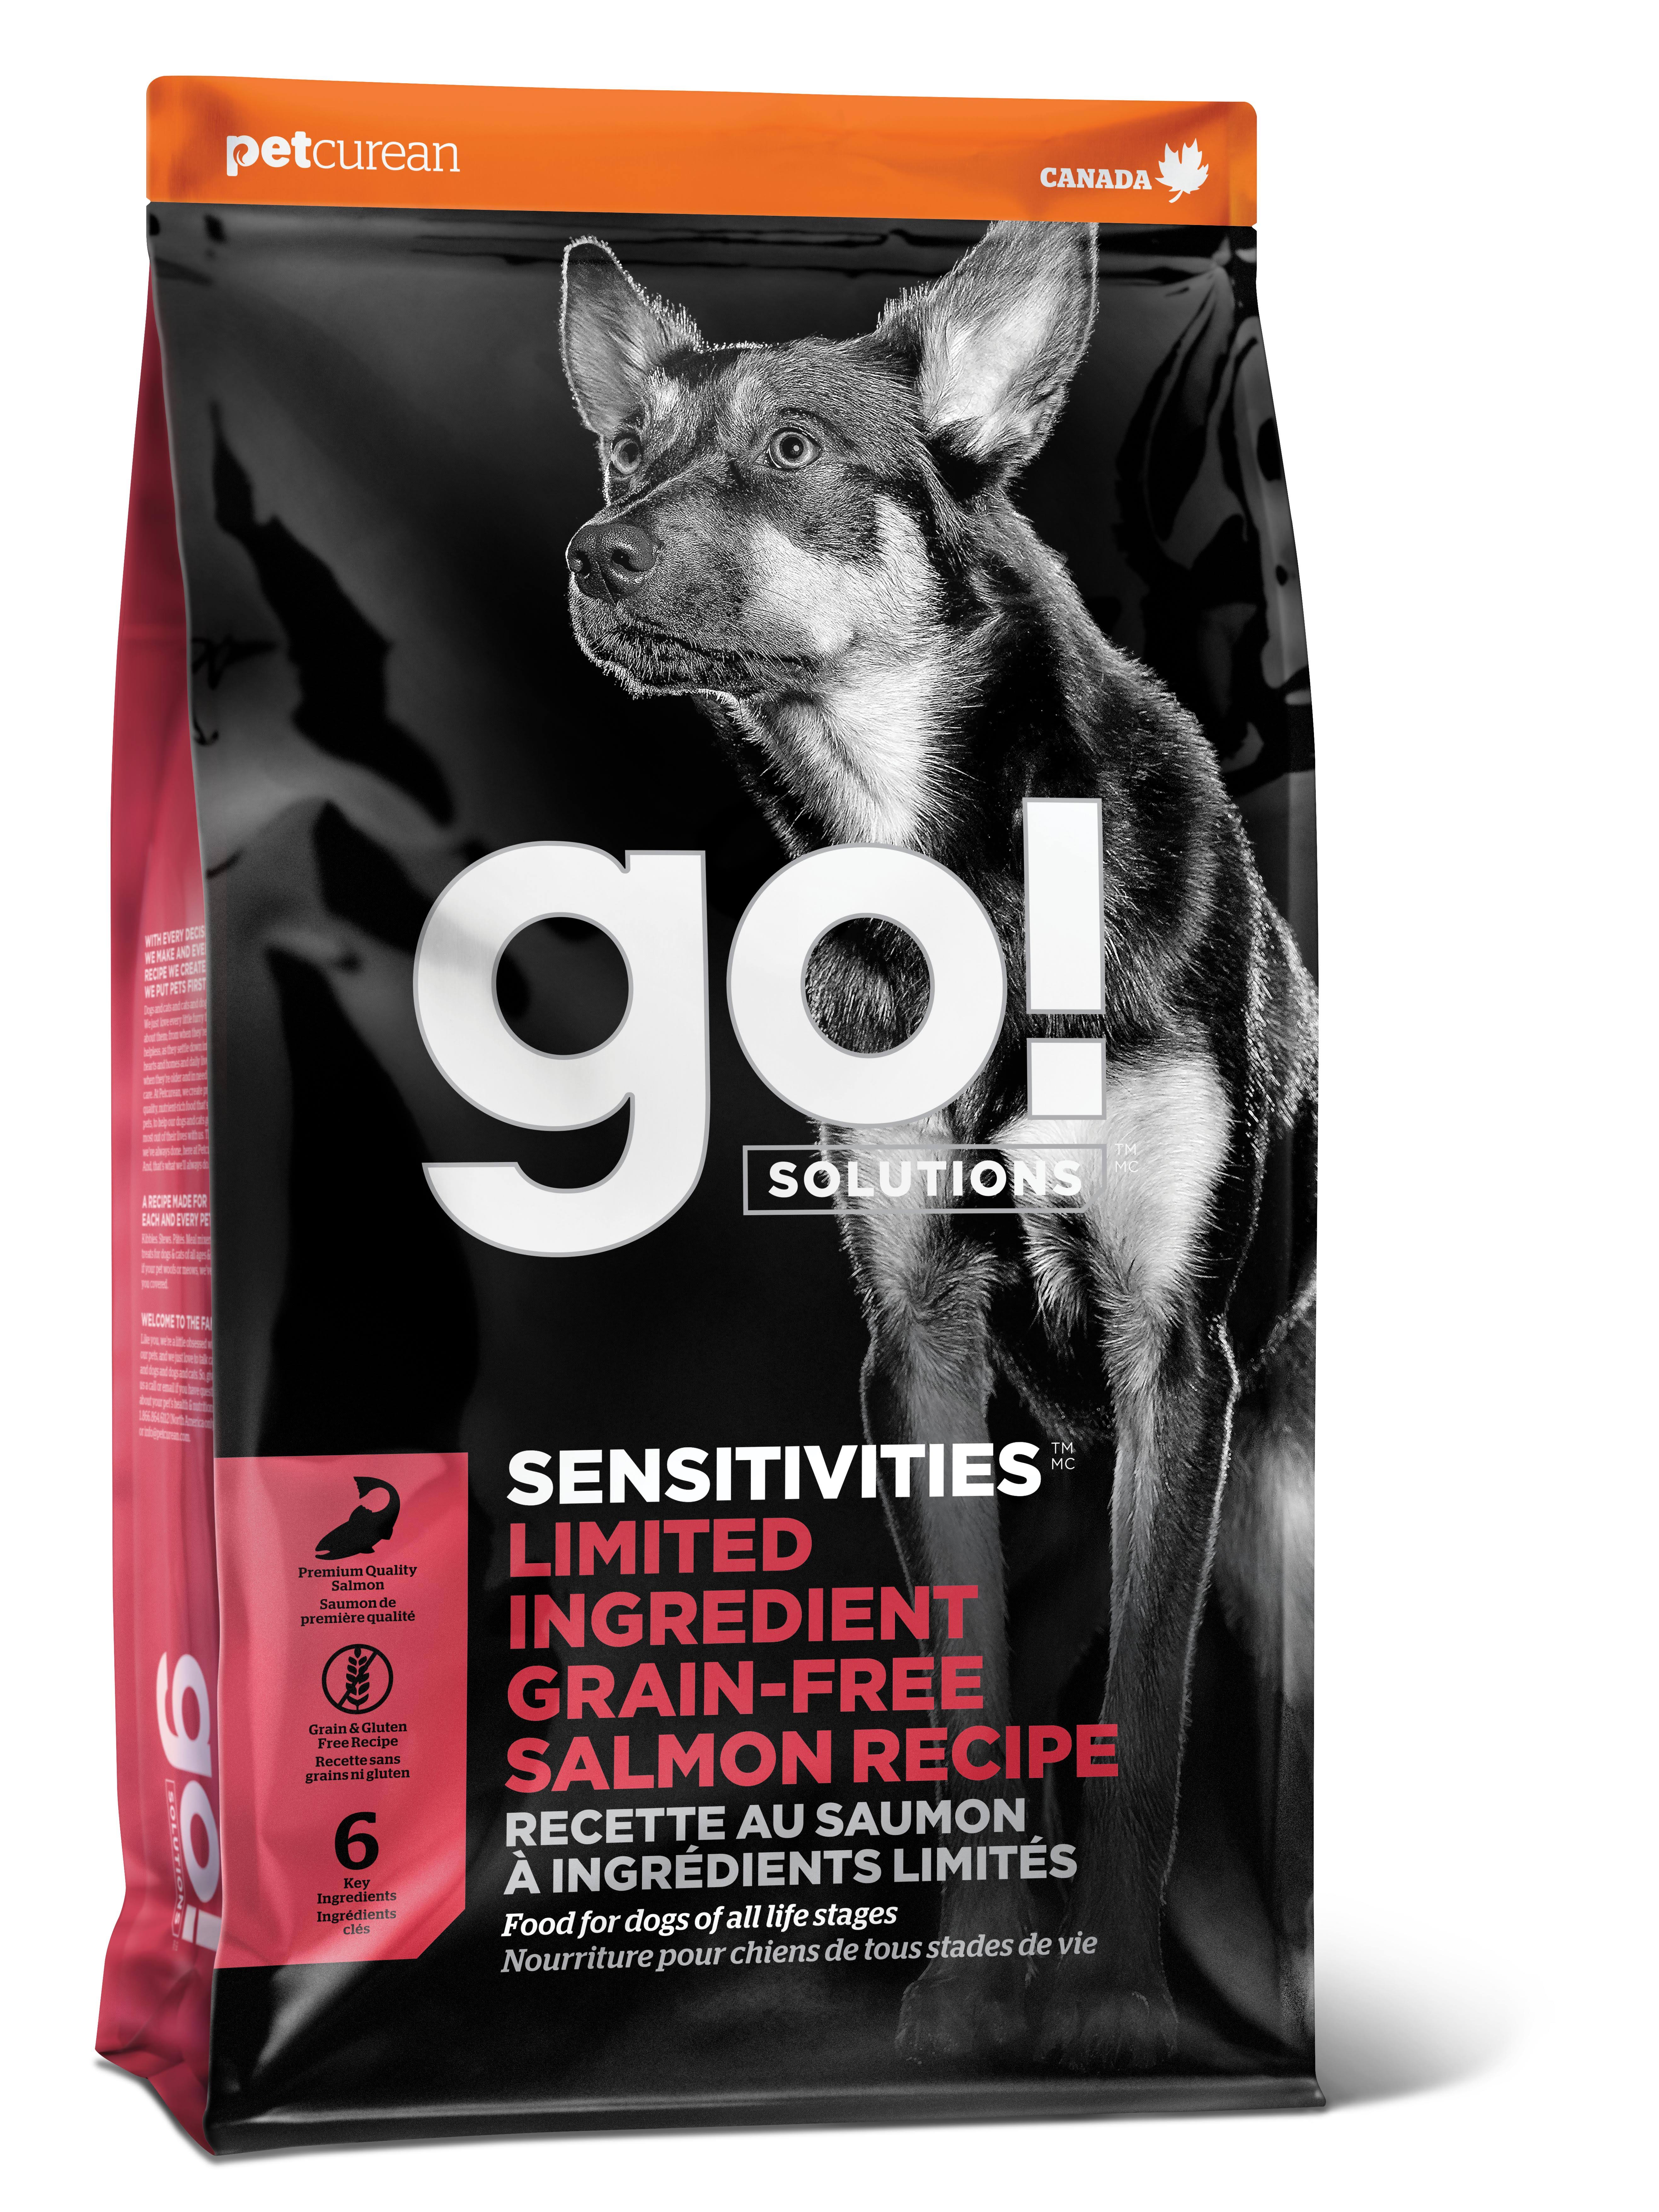 Go! Solutions Sensitivities Limited Ingredient Salmon Recipe Dry Dog Food, 22 Pounds